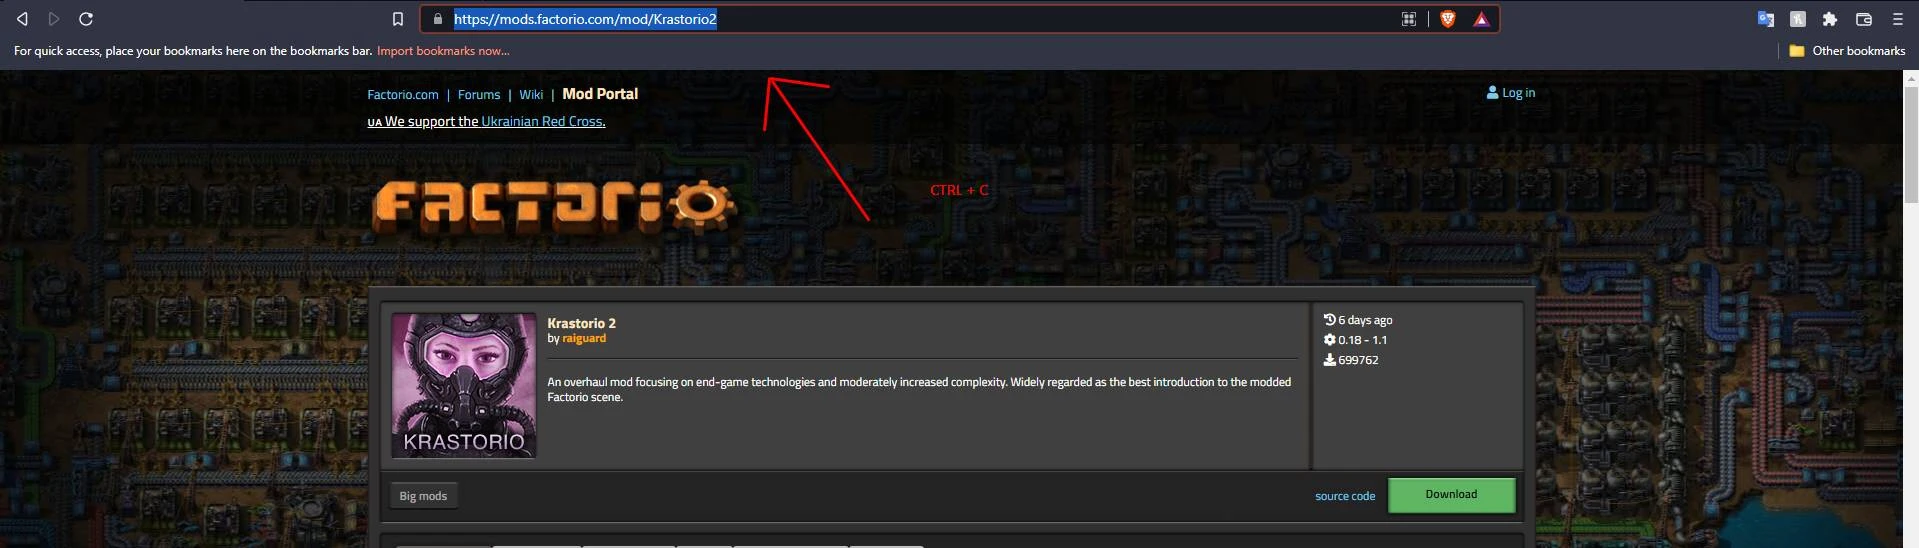 Download All Mods from Steam Workshop for Cracked Games (Very Simple) 